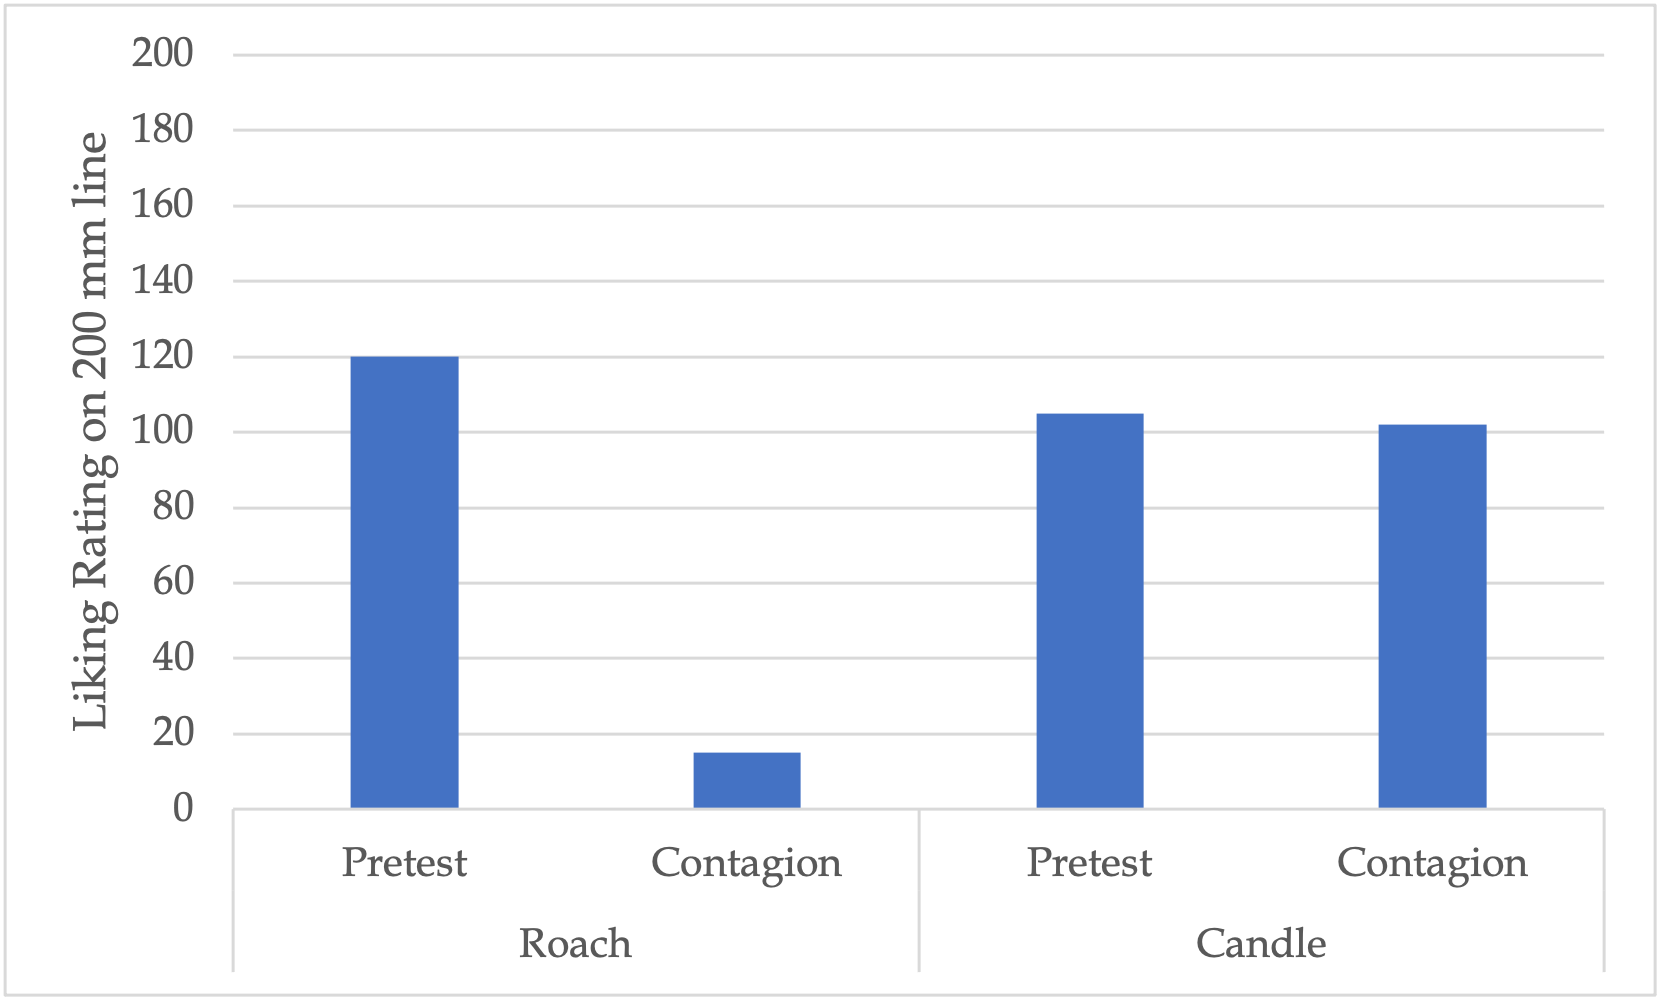 Two bar graphs. There is a pre-test and contagion bar for both the roach graph; and the candle graph. The y axis measures the liking rating on a 200 mm line, which starts at 0, increases in increments of 20, to a maximum of 200. Roach Pre-test bar - 120. Roach contagion bar - 15. Candle pre-test bar - 105. Candle Contagion bar - 101.